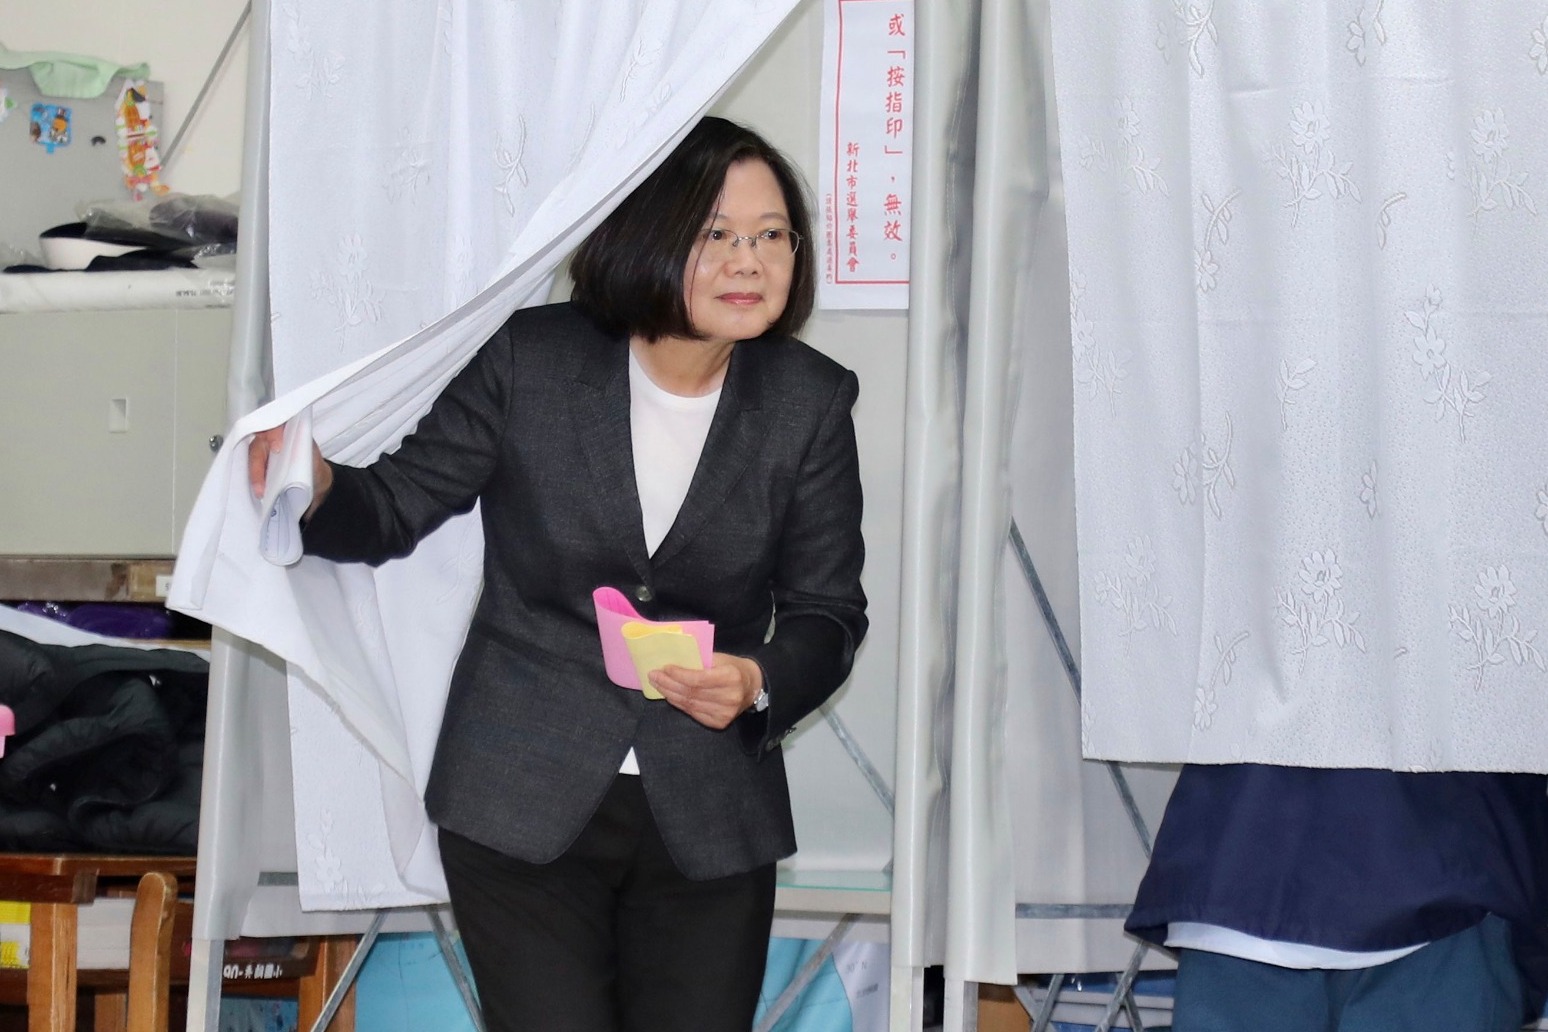 Anti-Beijing candidate re-elected to lead Taiwan. 